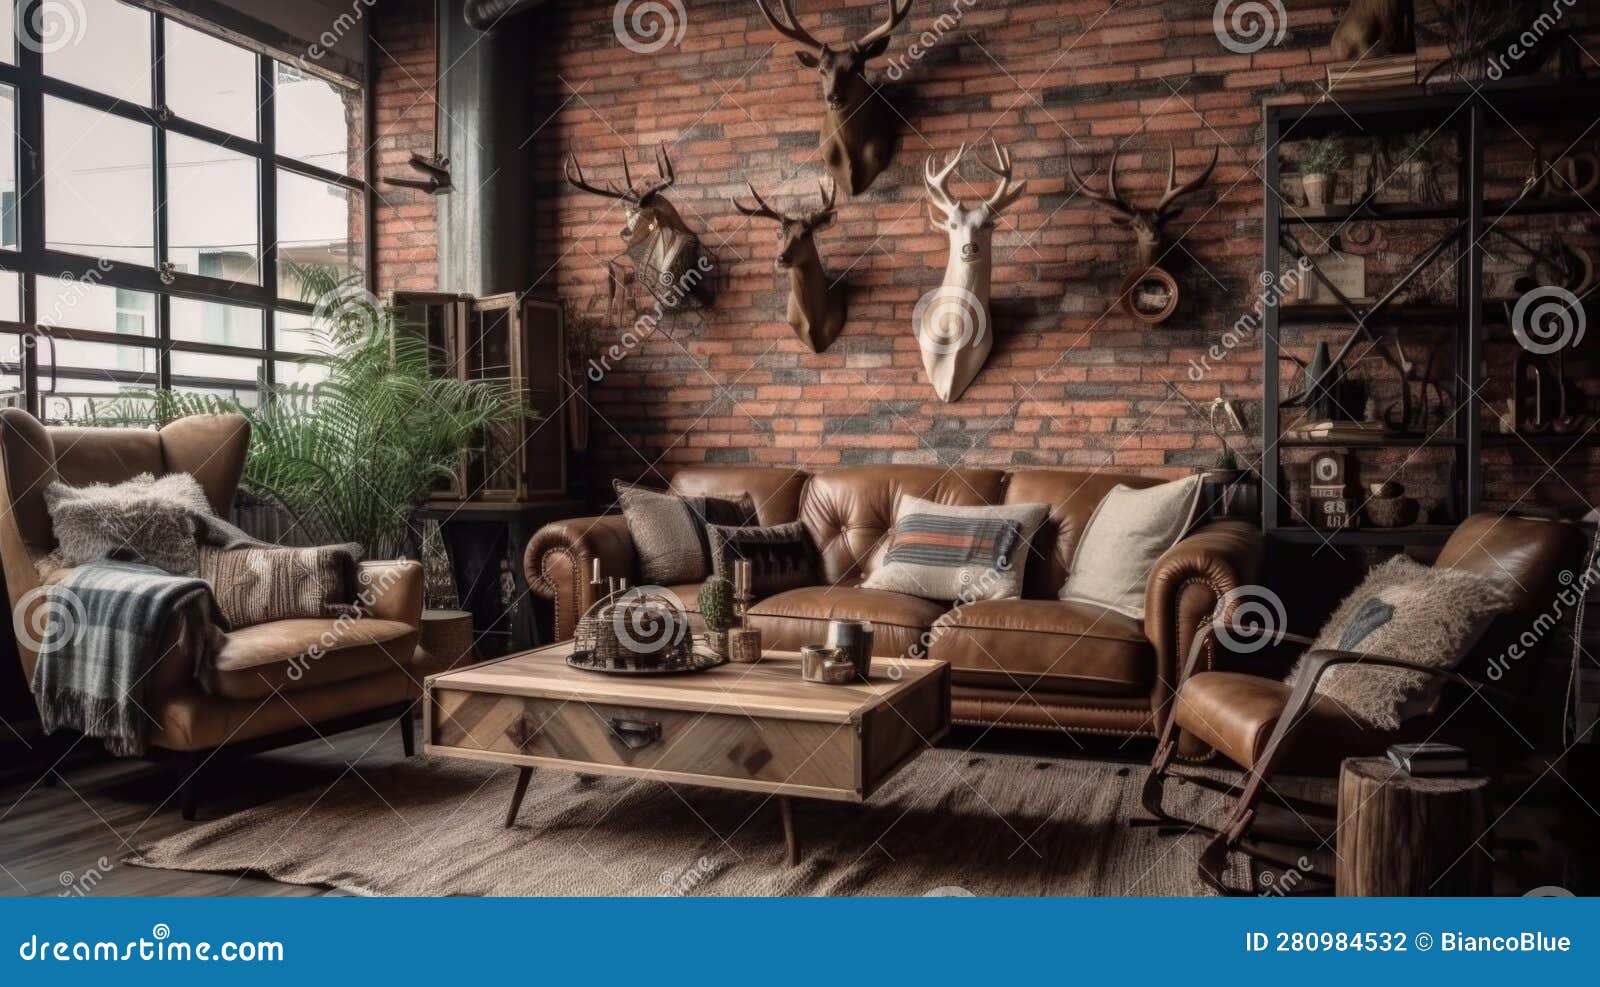 Living Room Decor, Home Interior Design . Rustic Industrial Style ...